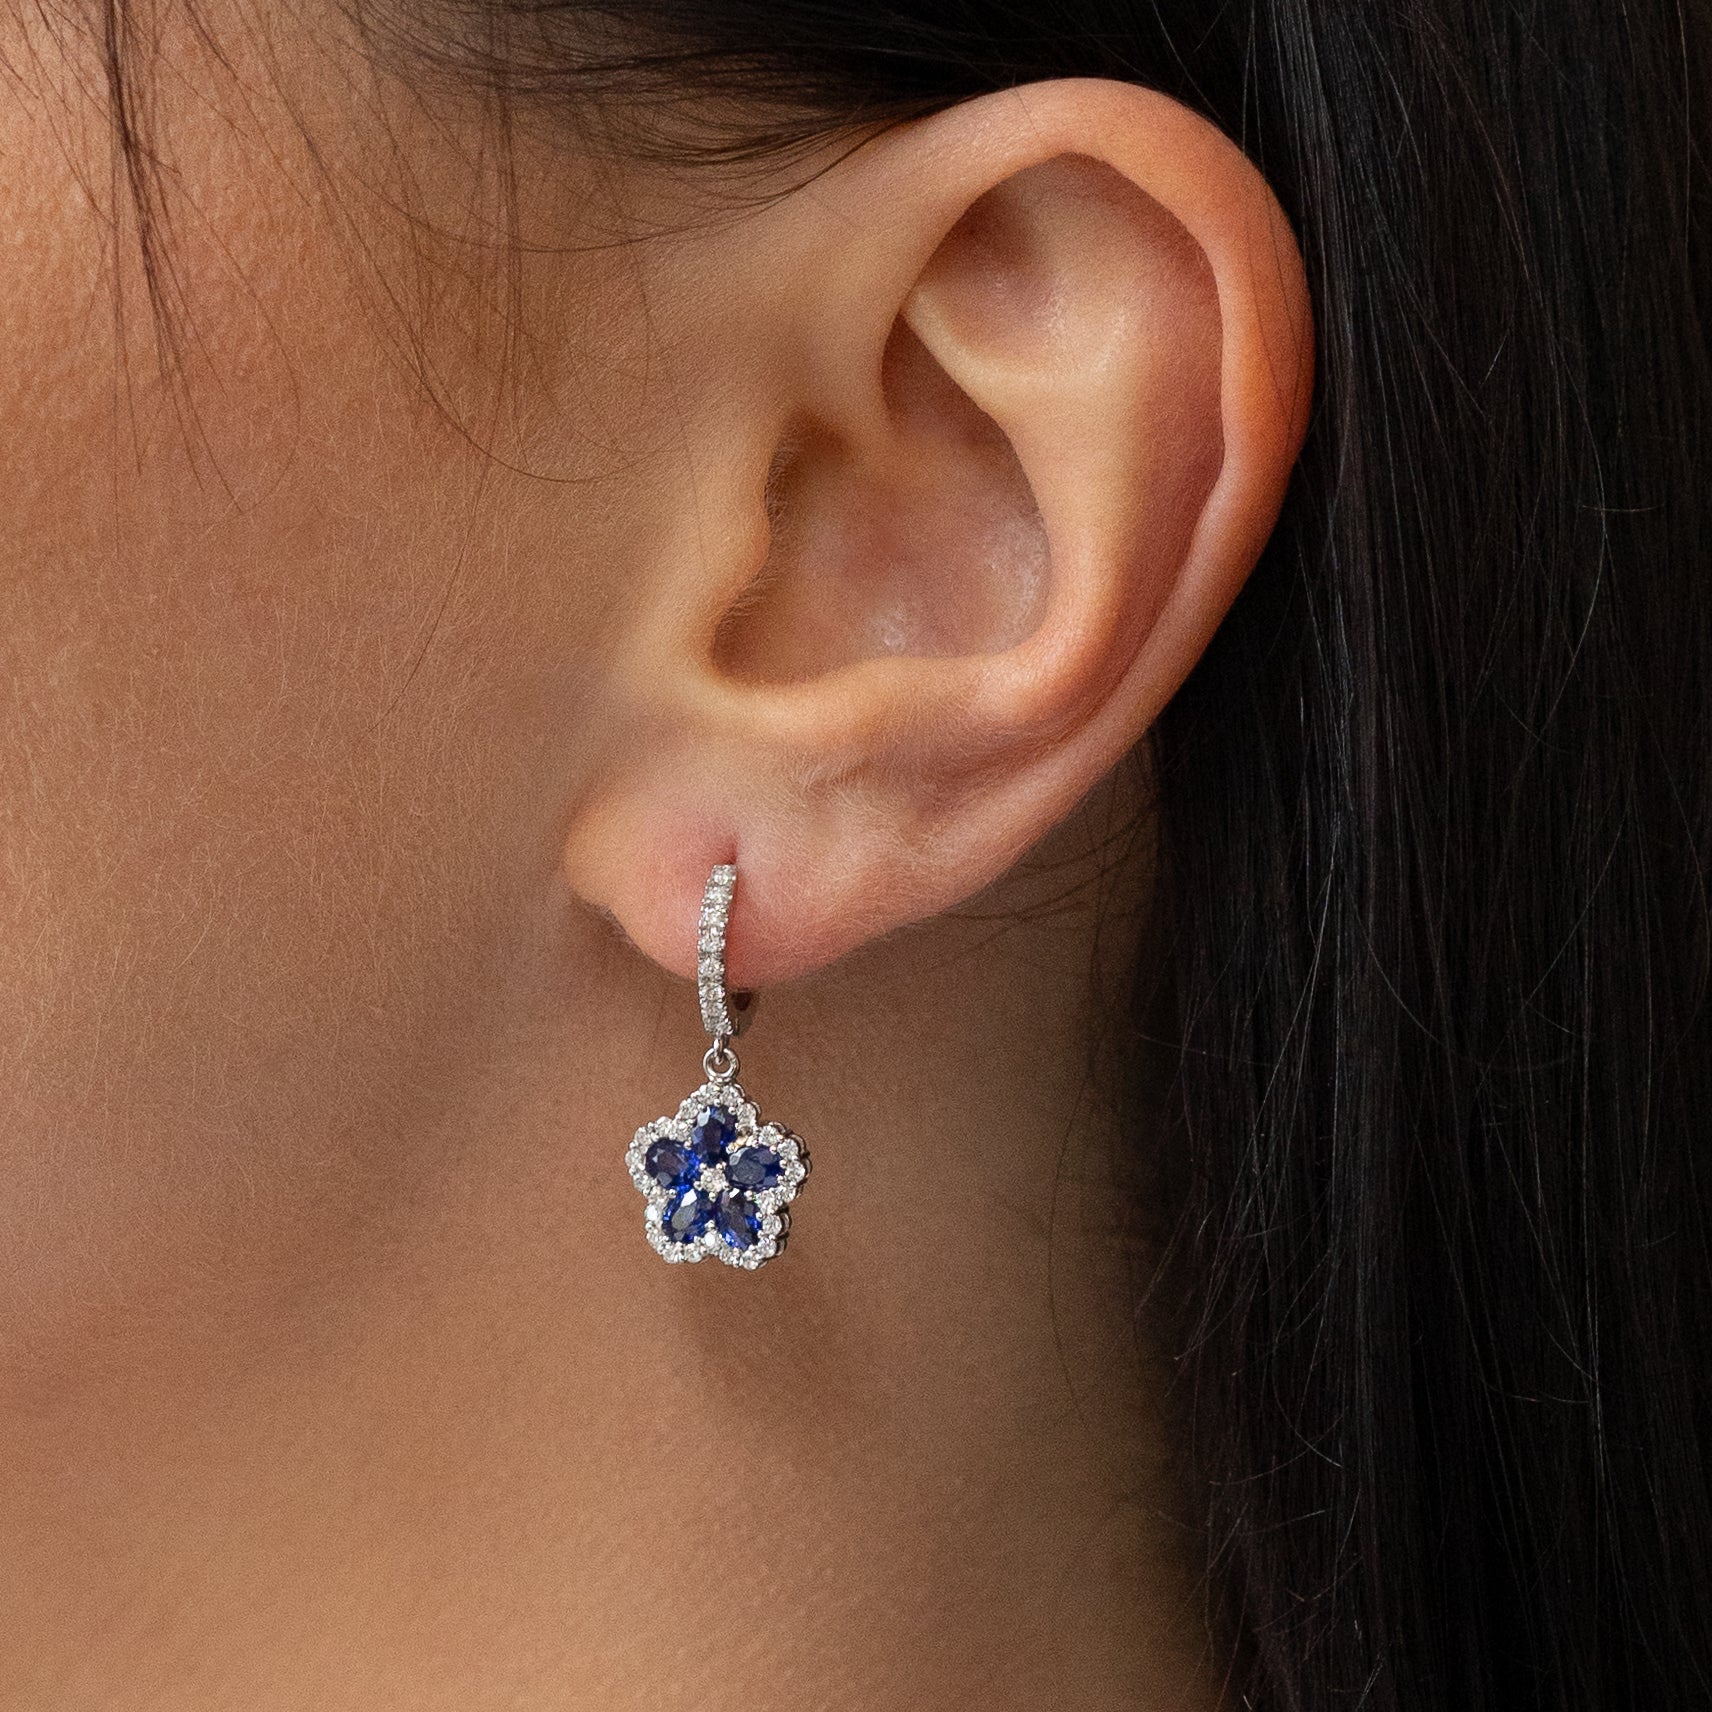 Flower Shape Earrings with Sapphires and Diamonds